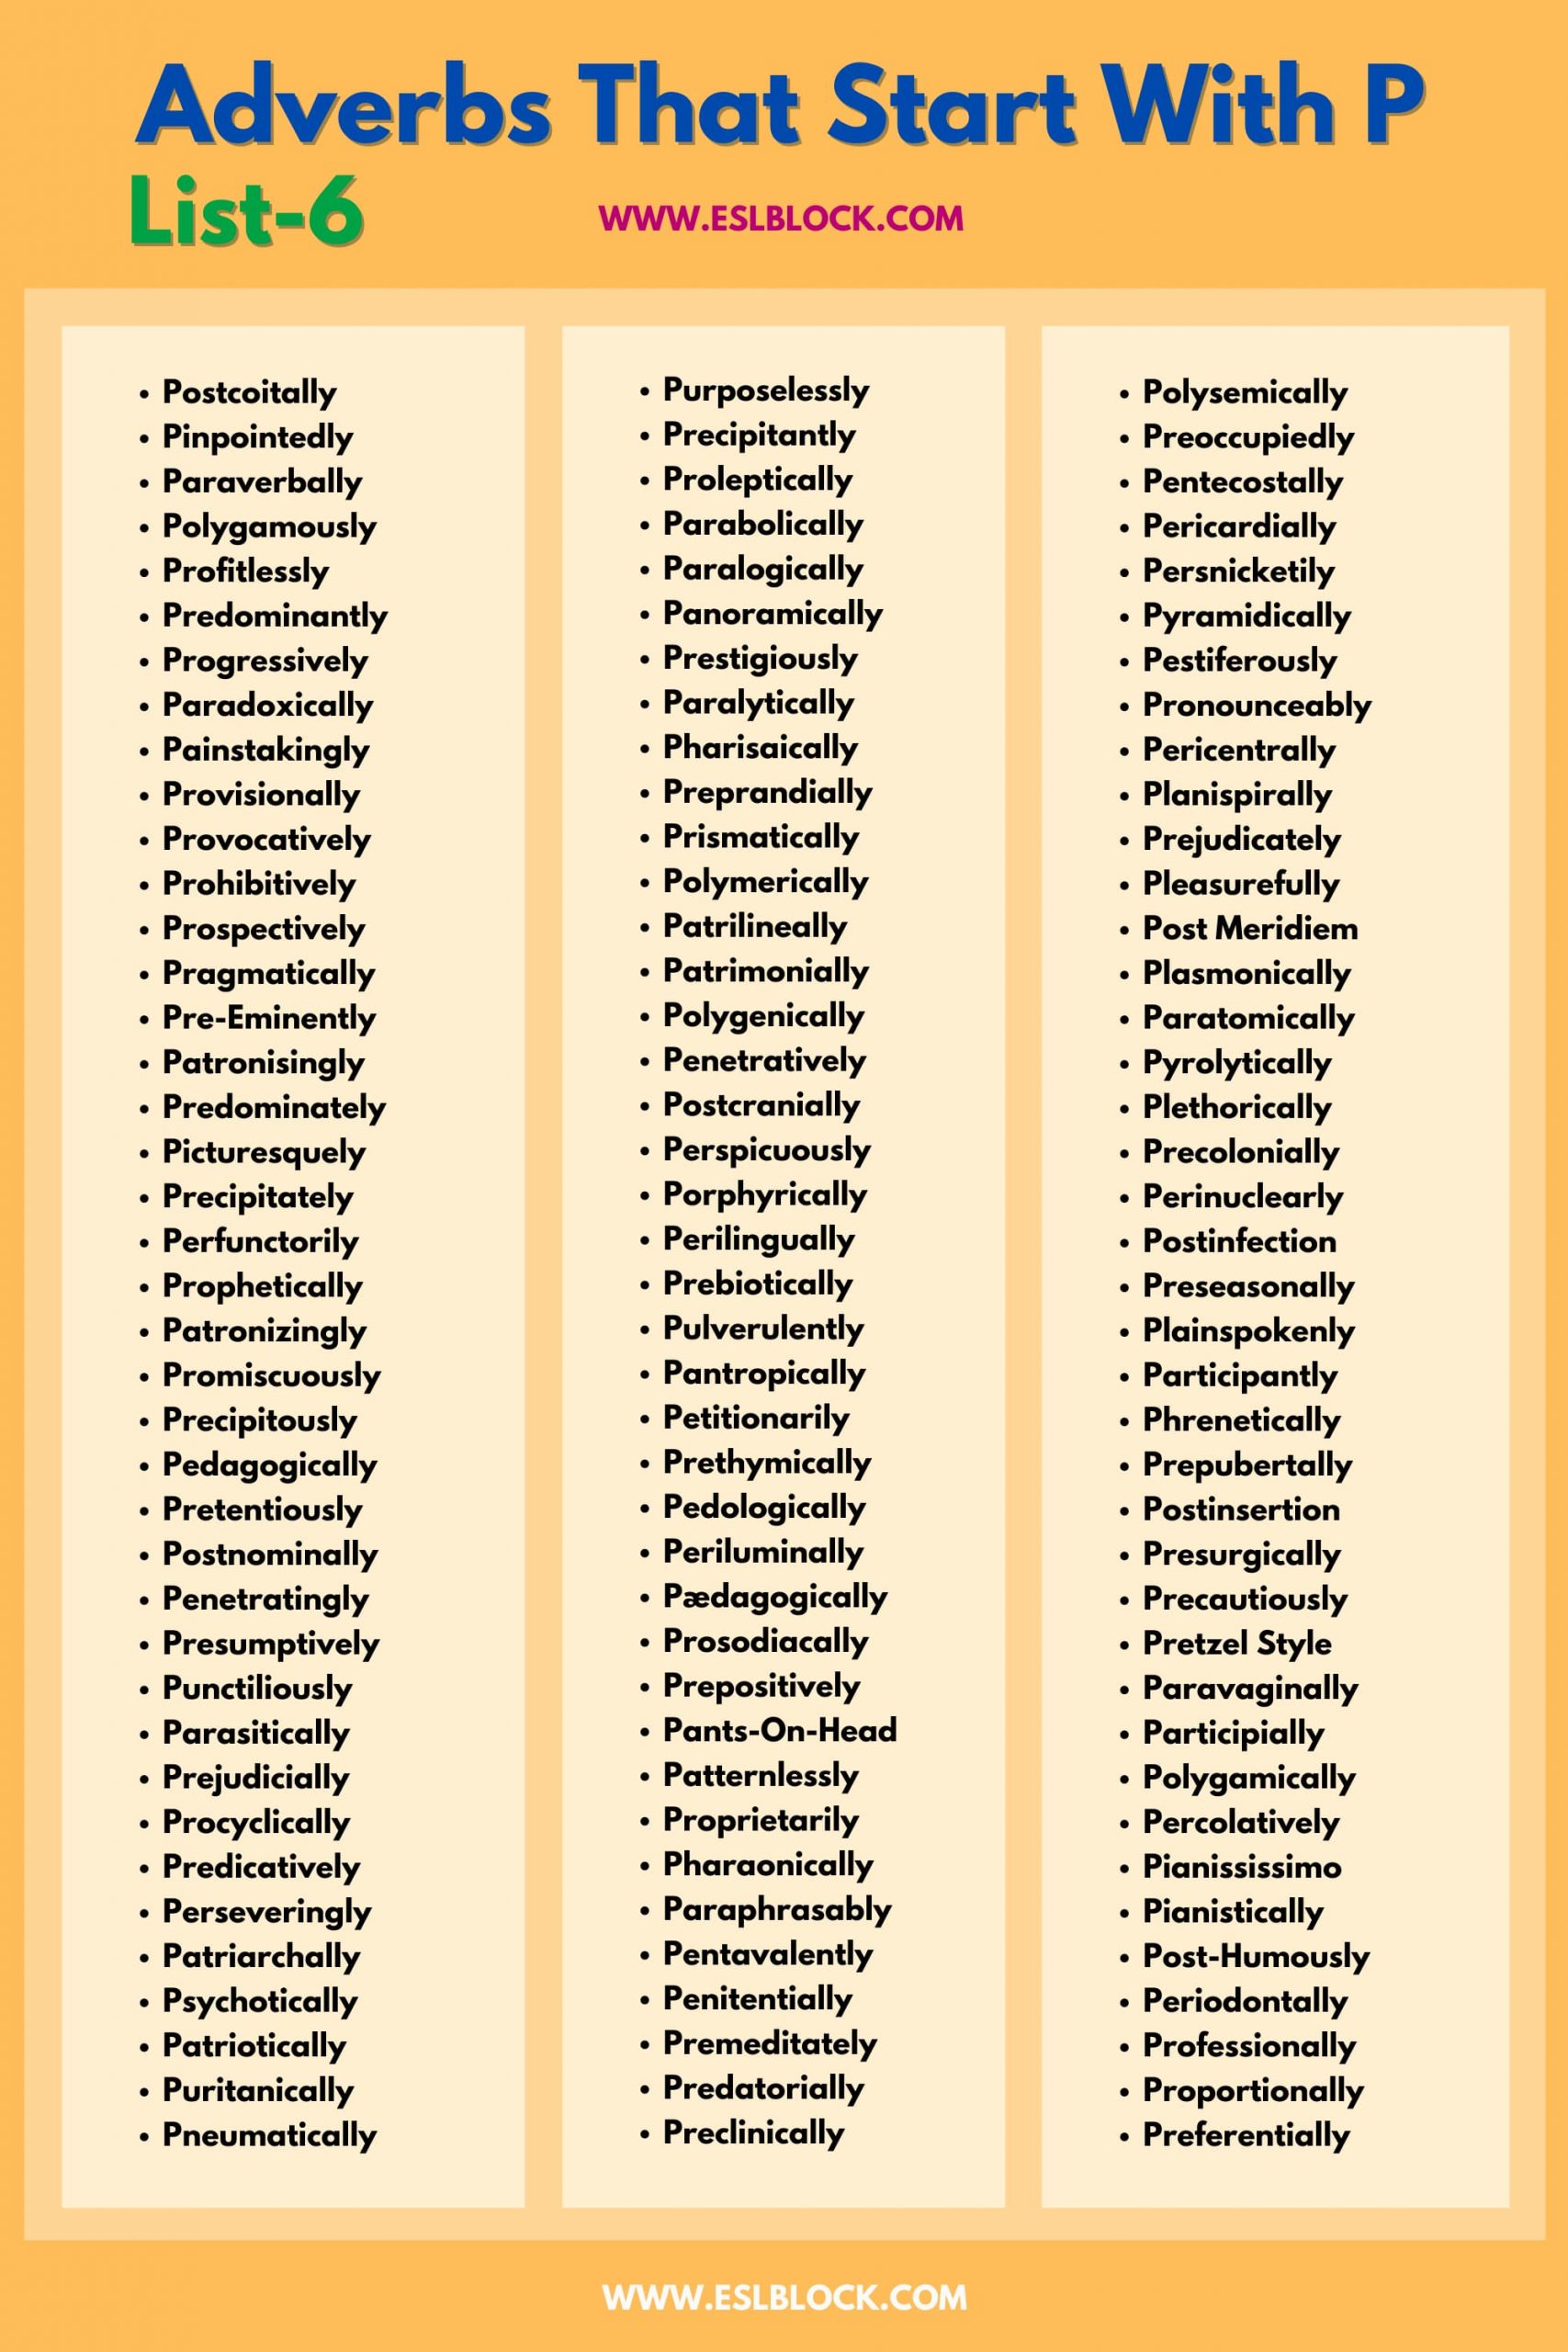 100 Example Sentences Using Adverbs, 4 Letter Adverbs That Start with P, 4 Letter Words, 5 Letter Adverbs That Start with P, 5 Letter Words, 6 Letter Adverbs That Start with P, 6 Letter Words, A to Z Adverbs, AA Adverbs, Adverb vocabulary words, Adverbs, Adverbs That Start with P, Adverbs with Example Sentences, All Adverbs, Types of Adverbs, Types of Adverbs with Example Sentences, Vocabulary, What are Adverbs, What are the types of Adverbs, Words That with P